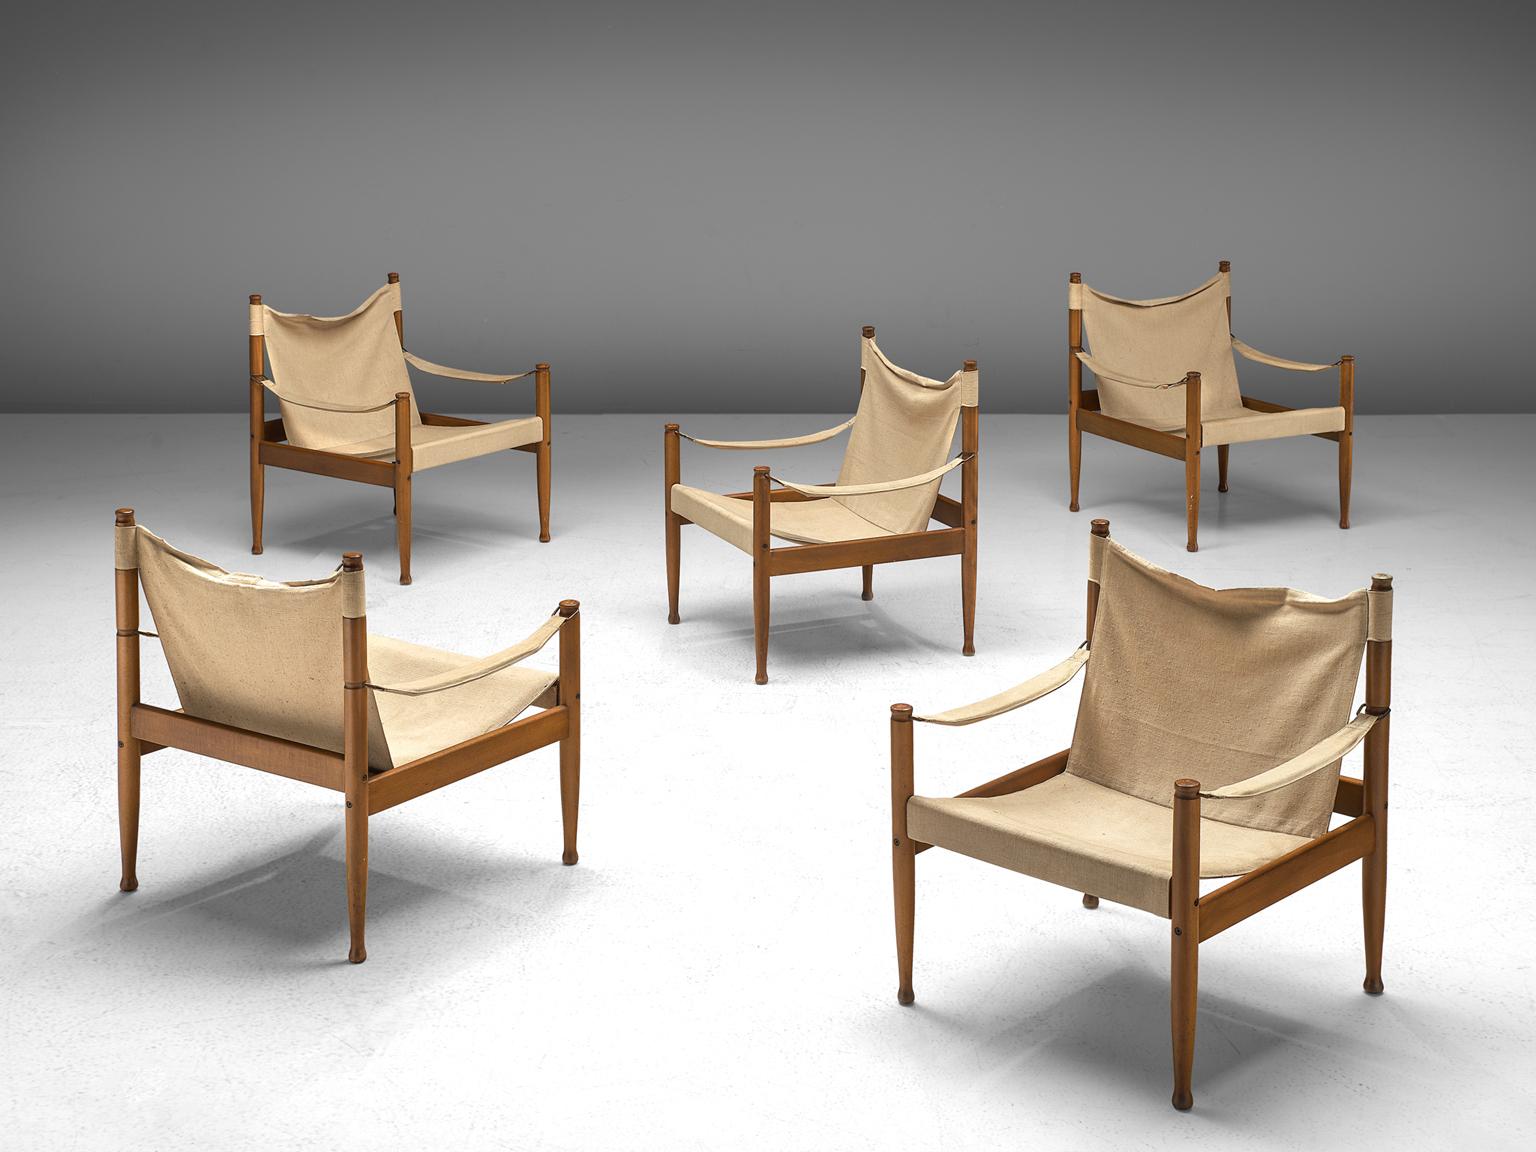 Erik Wørts, set of 5 Safari Chairs, oak and canvas, Denmark, 1960's

These sturdy lounge chairs with oak frame are designed by Danish designer Erik Wørts. The canvas seating in combination with the oak frame shows a wonderful contrast. The wooden